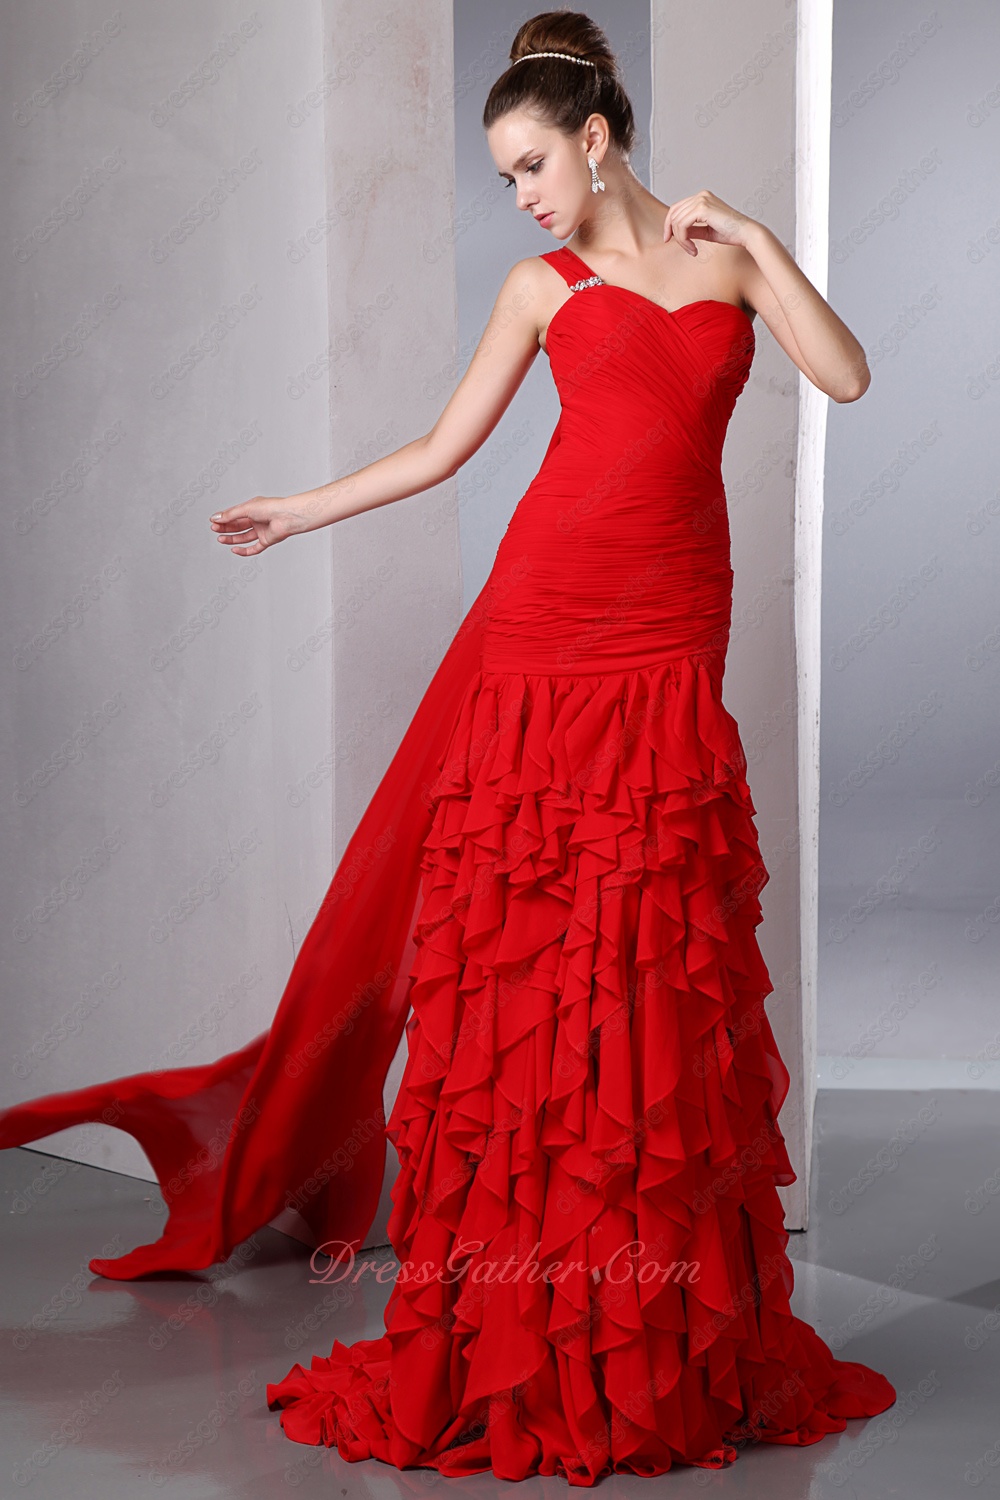 Cascade Fall Ruffles Red Social Evening Gowns One Shoulder Strap With Watteau - Click Image to Close